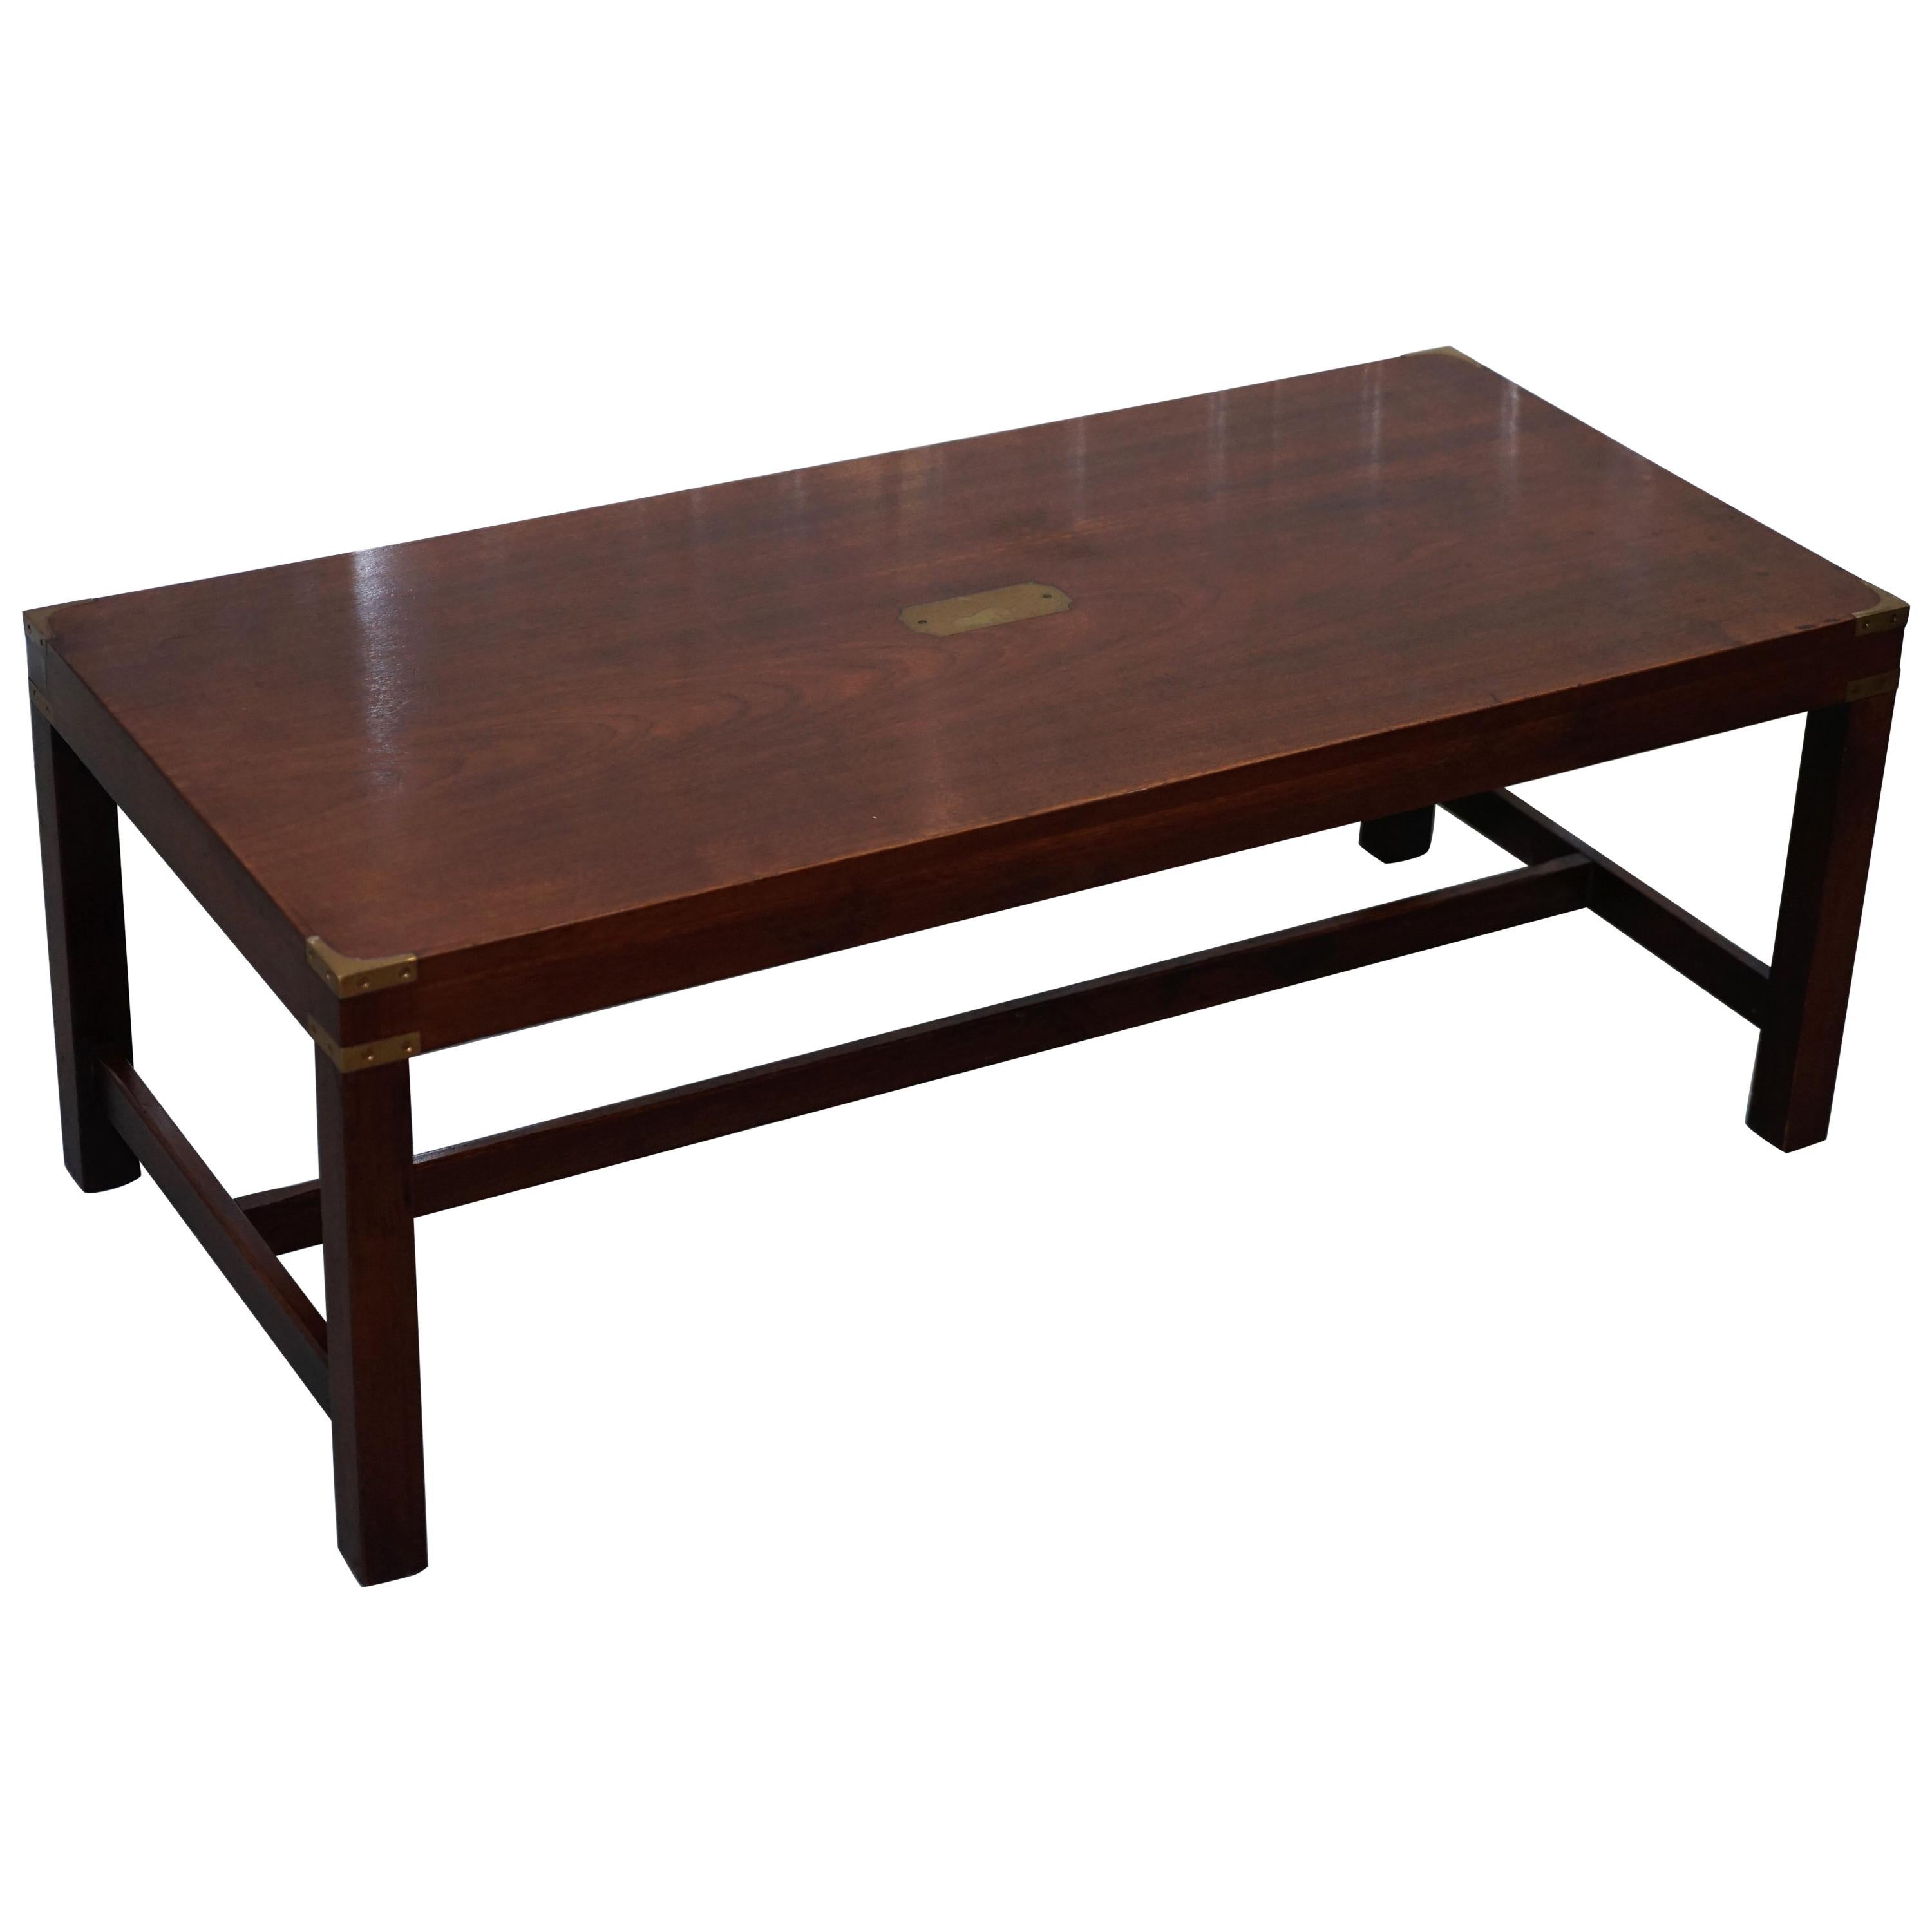 Harrods London Mahogany Kennedy Furniture Military Campaign Coffee Table